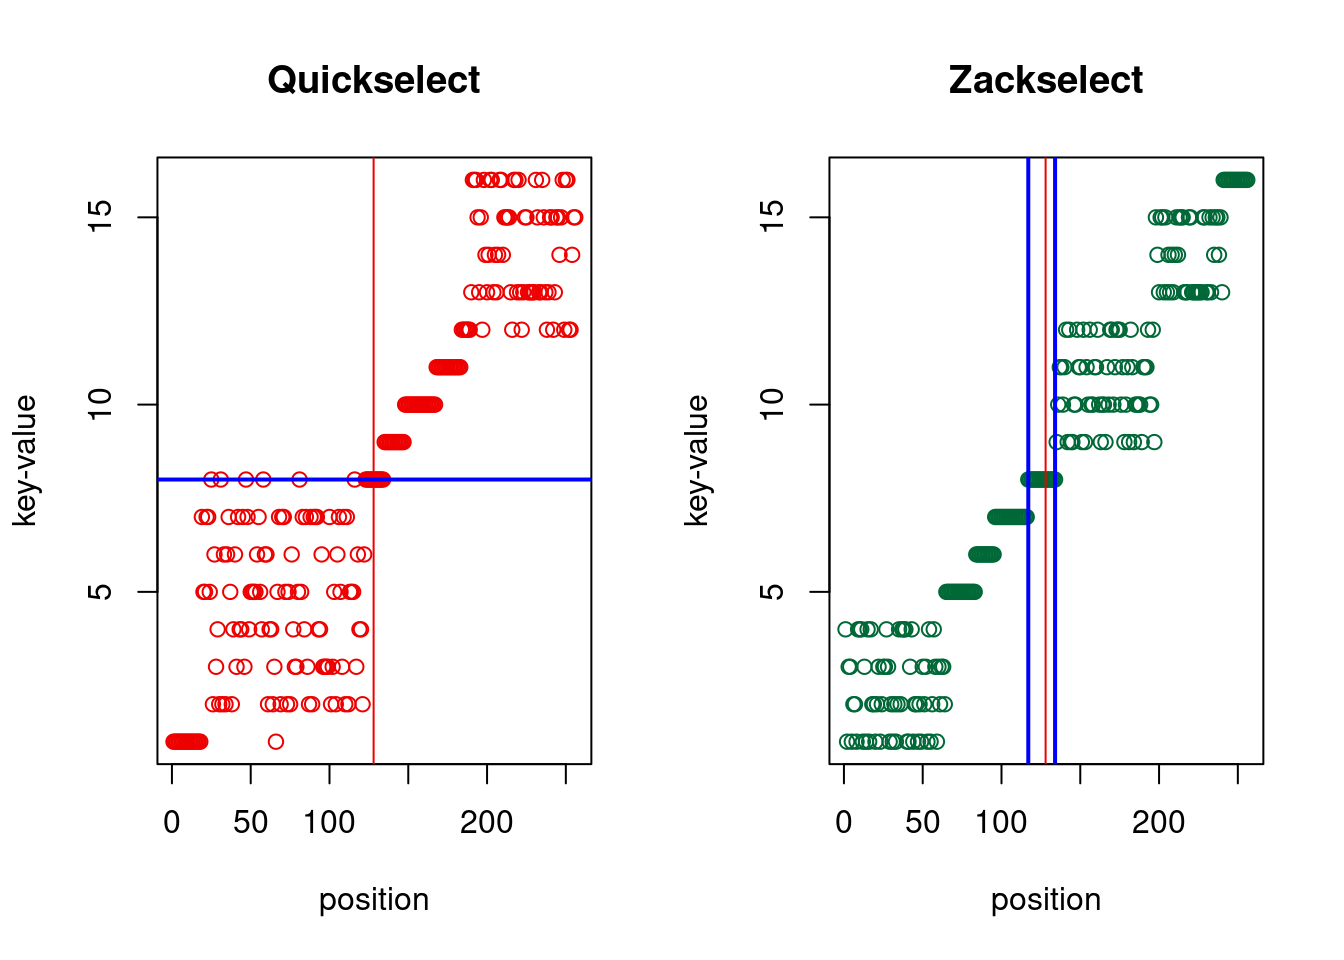 Quickselect versus Zackselect, return value(s) in blue